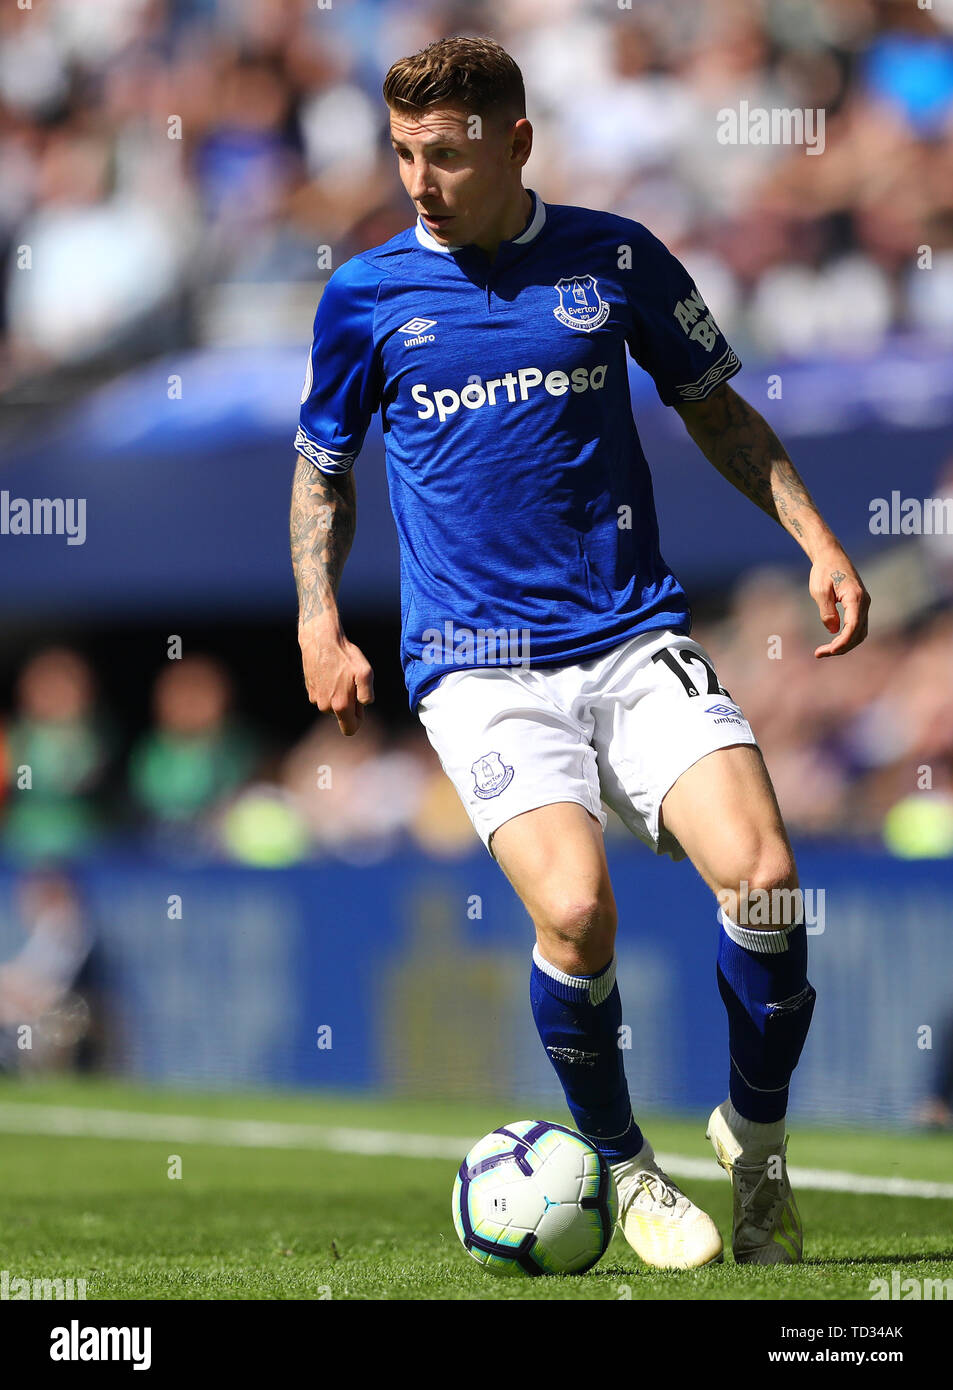 Lucas Digne of Everton - Tottenham Hotspur v Everton, Premier League, Tottenham Hotspur Stadium, London - 12th May 2019  Editorial Use Only - DataCo restrictions apply Stock Photo